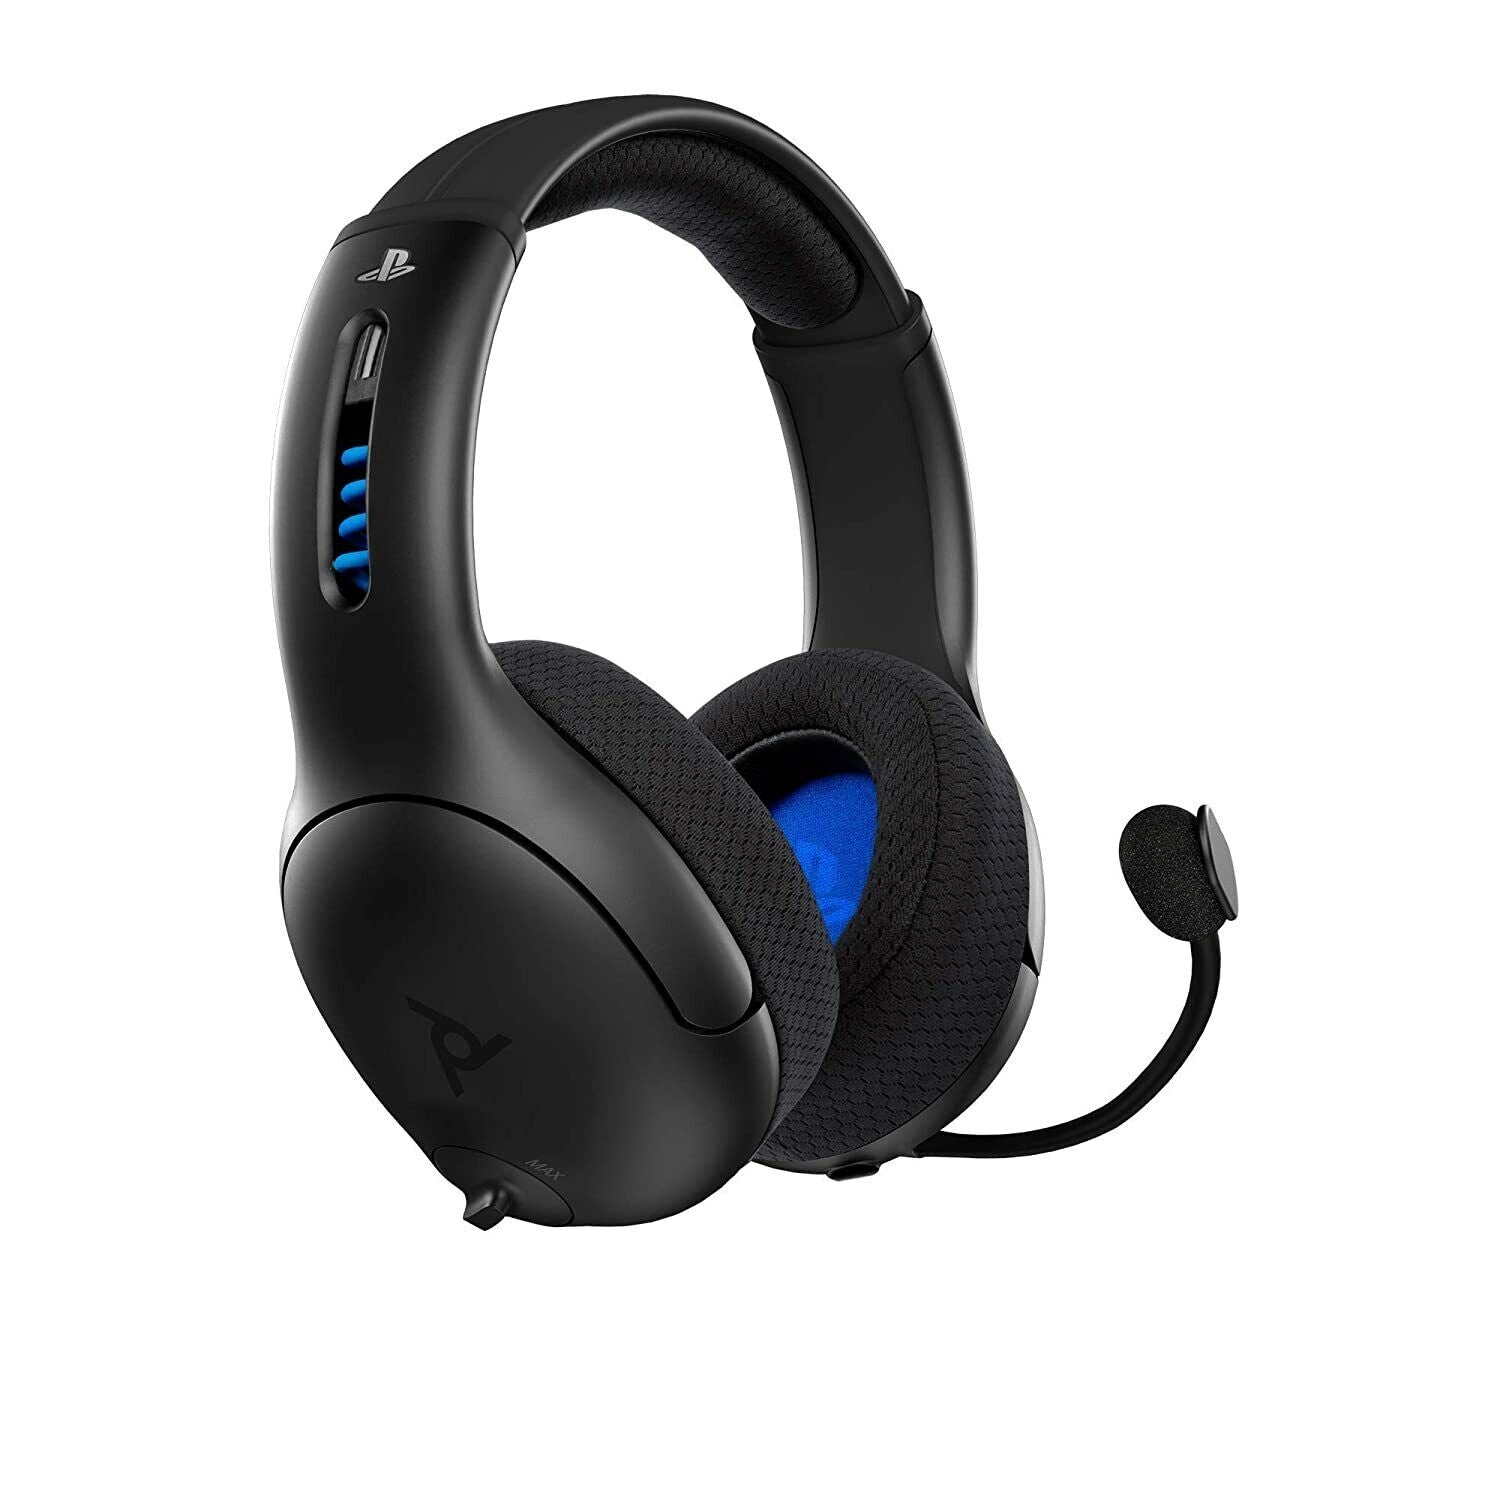 PDP LVL40 Wired Stereo Gaming Headset, PS4, On Sale Now